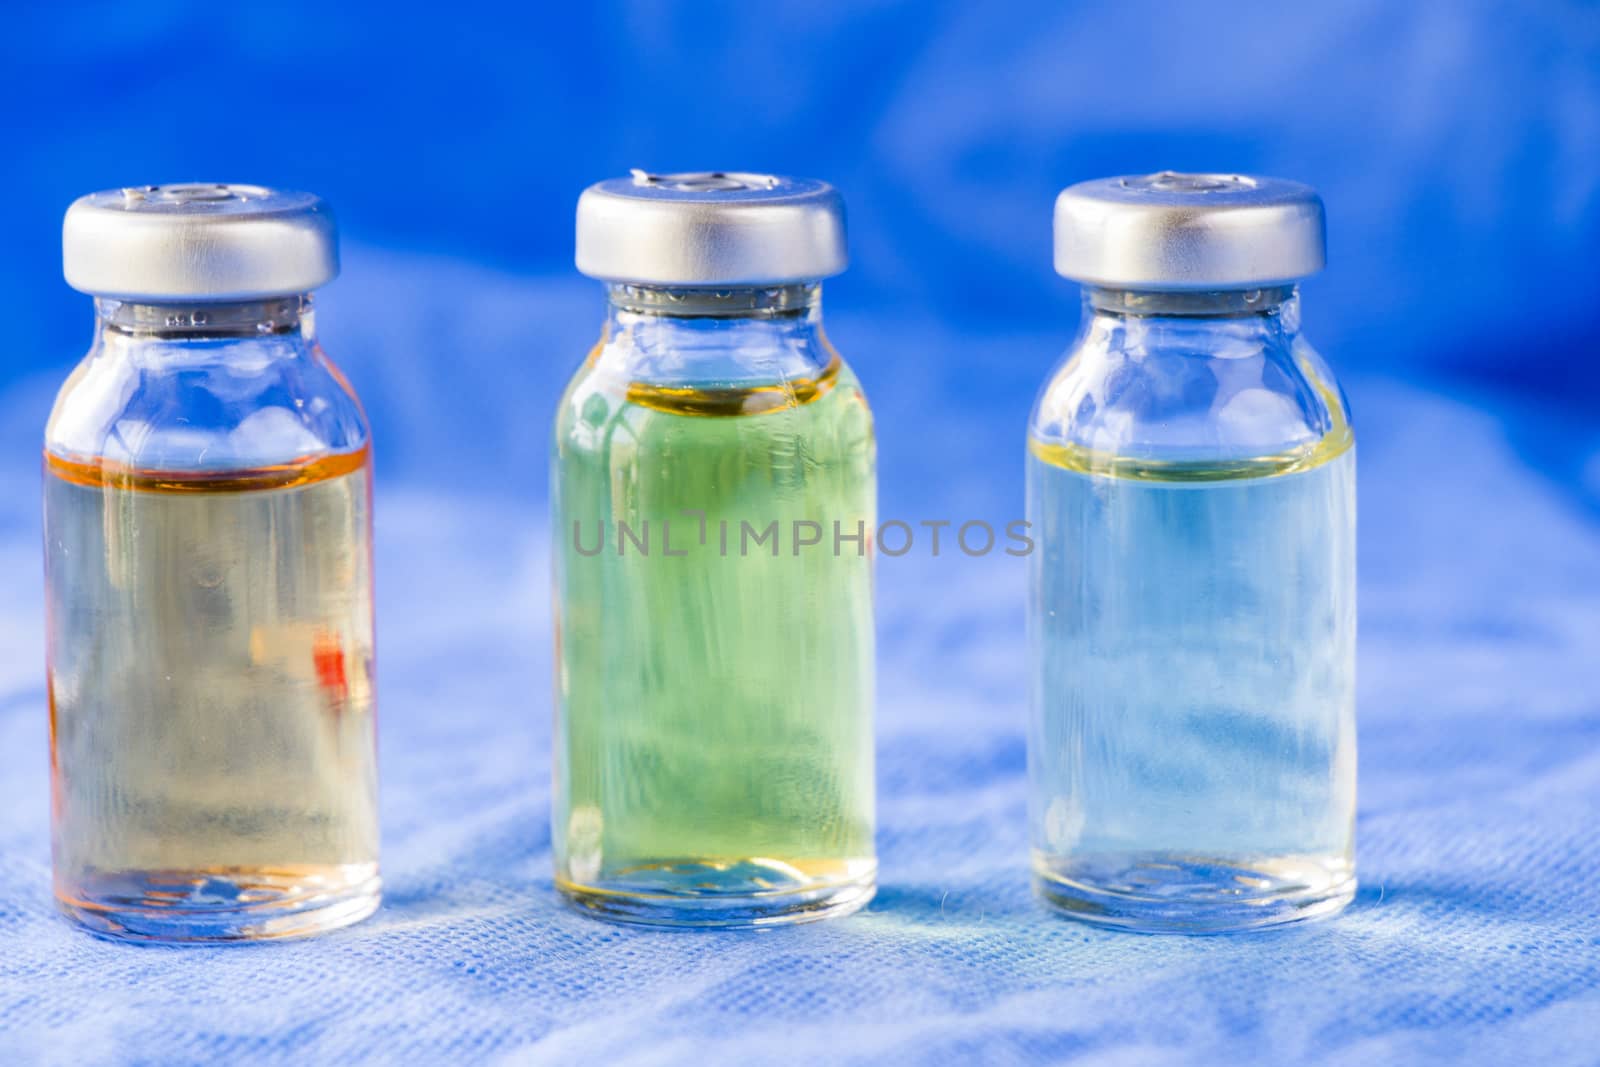 Corona virus and Covid - 19 new vaccine in ampules, different color variations of vaccine by Taidundua